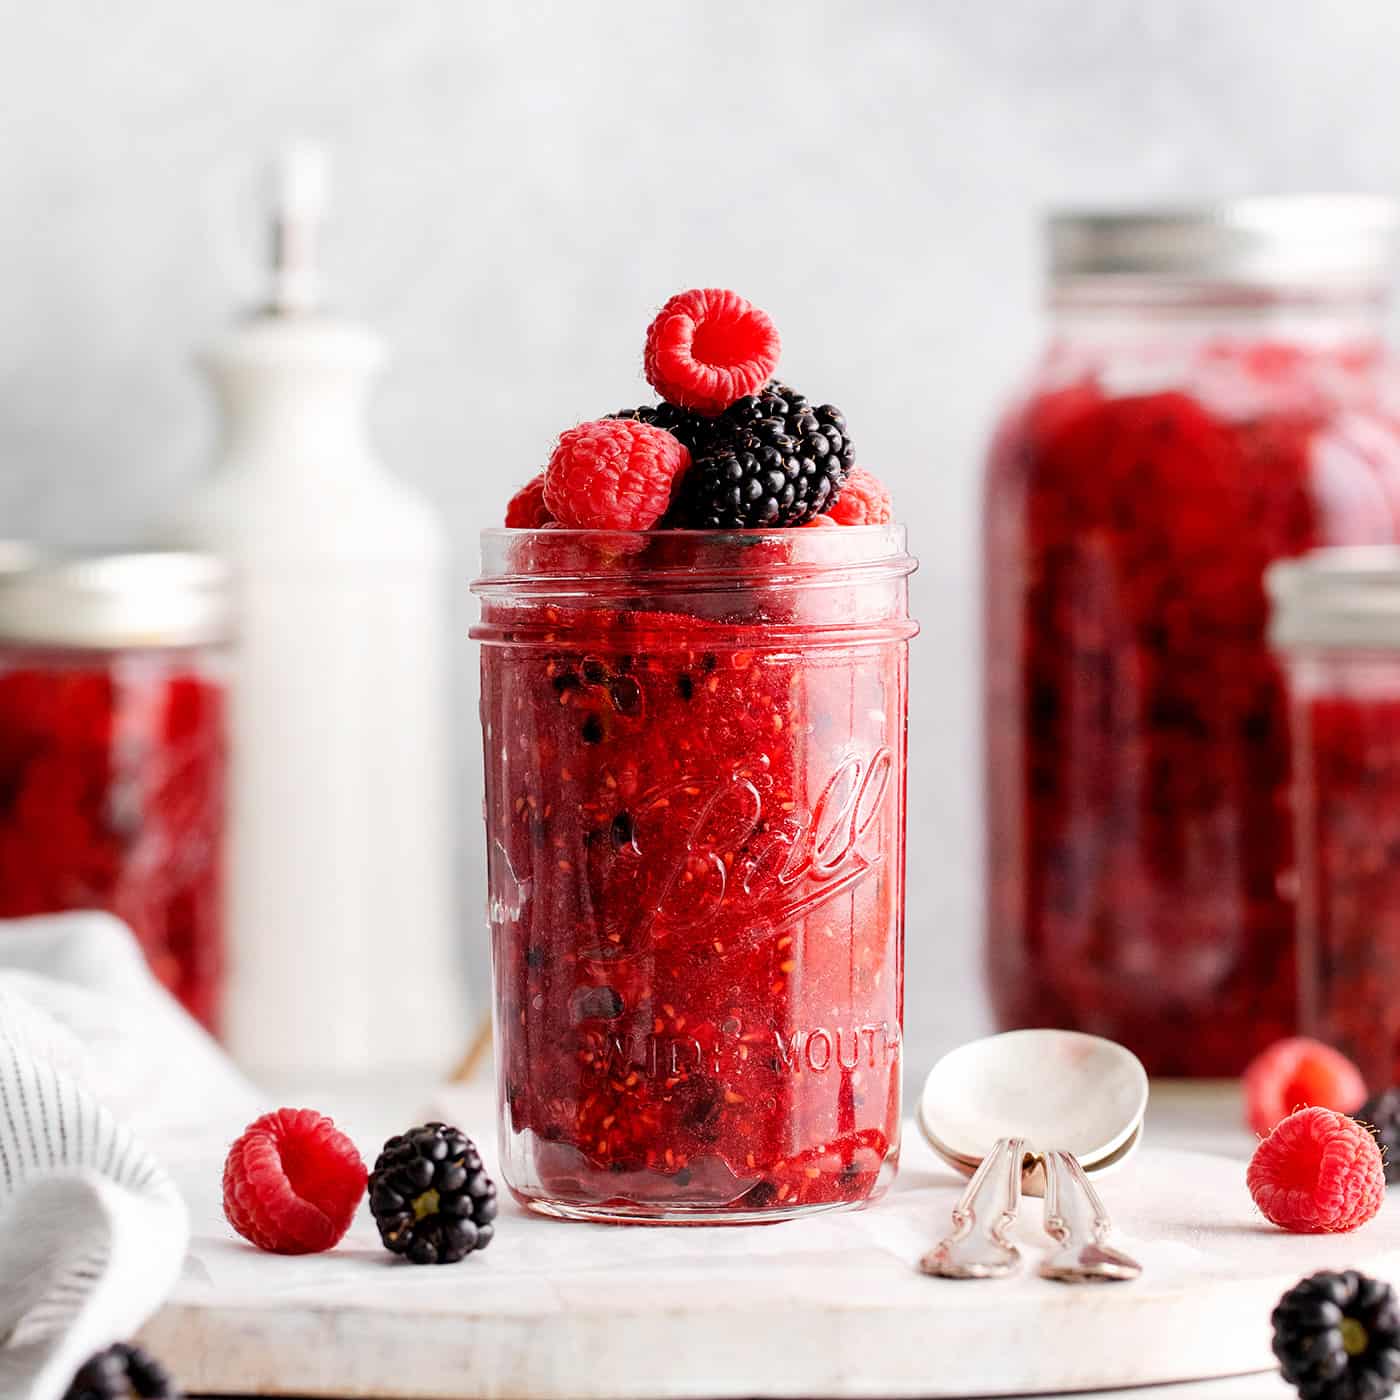 Front view of a jar of freezer jam topped with raspberries and blackberries